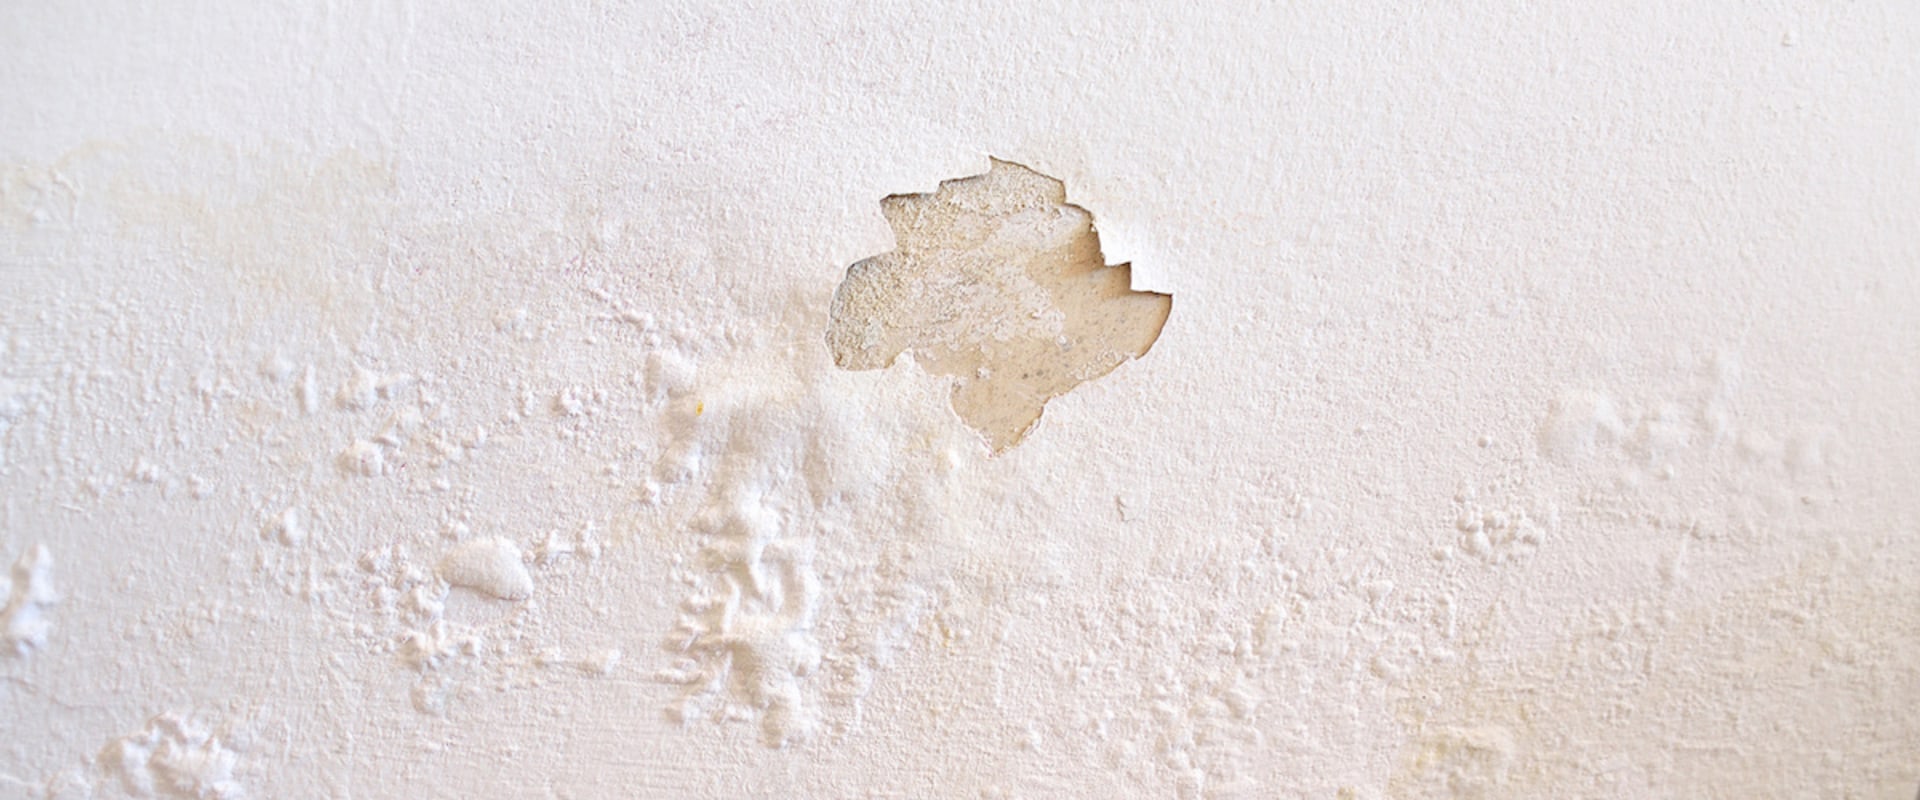 What to Do When Your Drywall Gets Wet